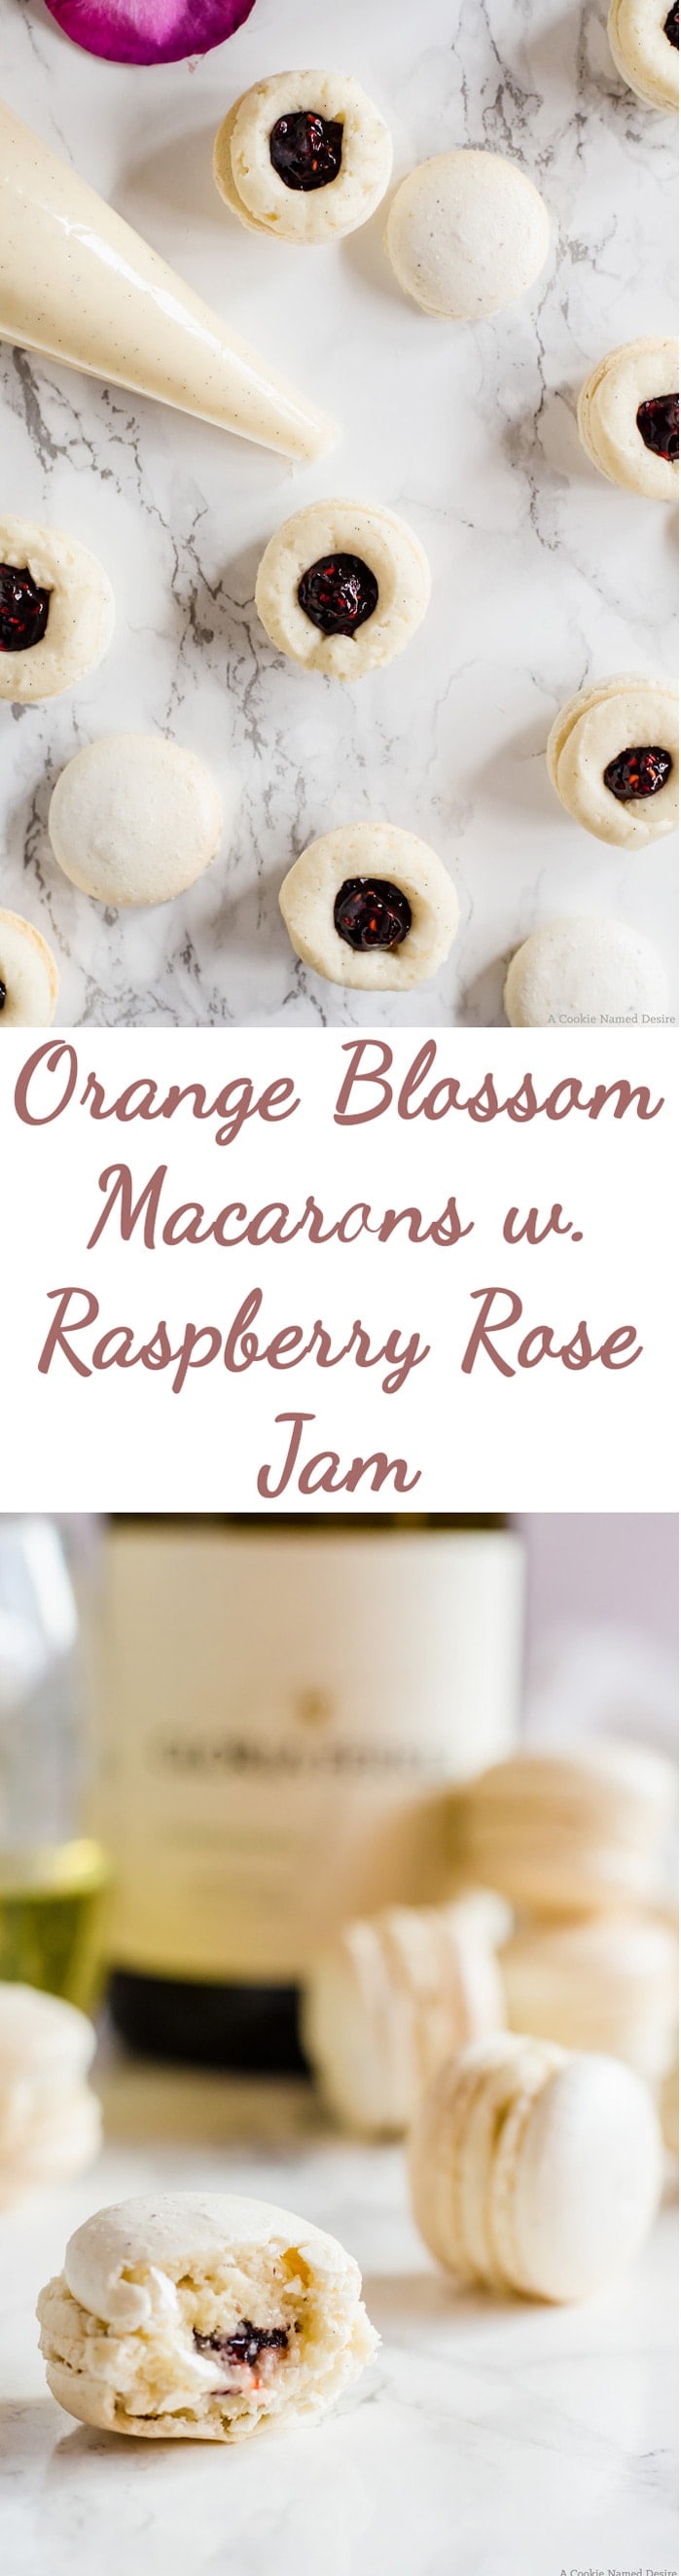 Your taste buds will rejoice once you bite into these delicately flavored orange blossom macarons with raspberry rose jam. These little macarons have a wonderfully floral attribute that reminds you of the first days of Spring without being overwhelming.